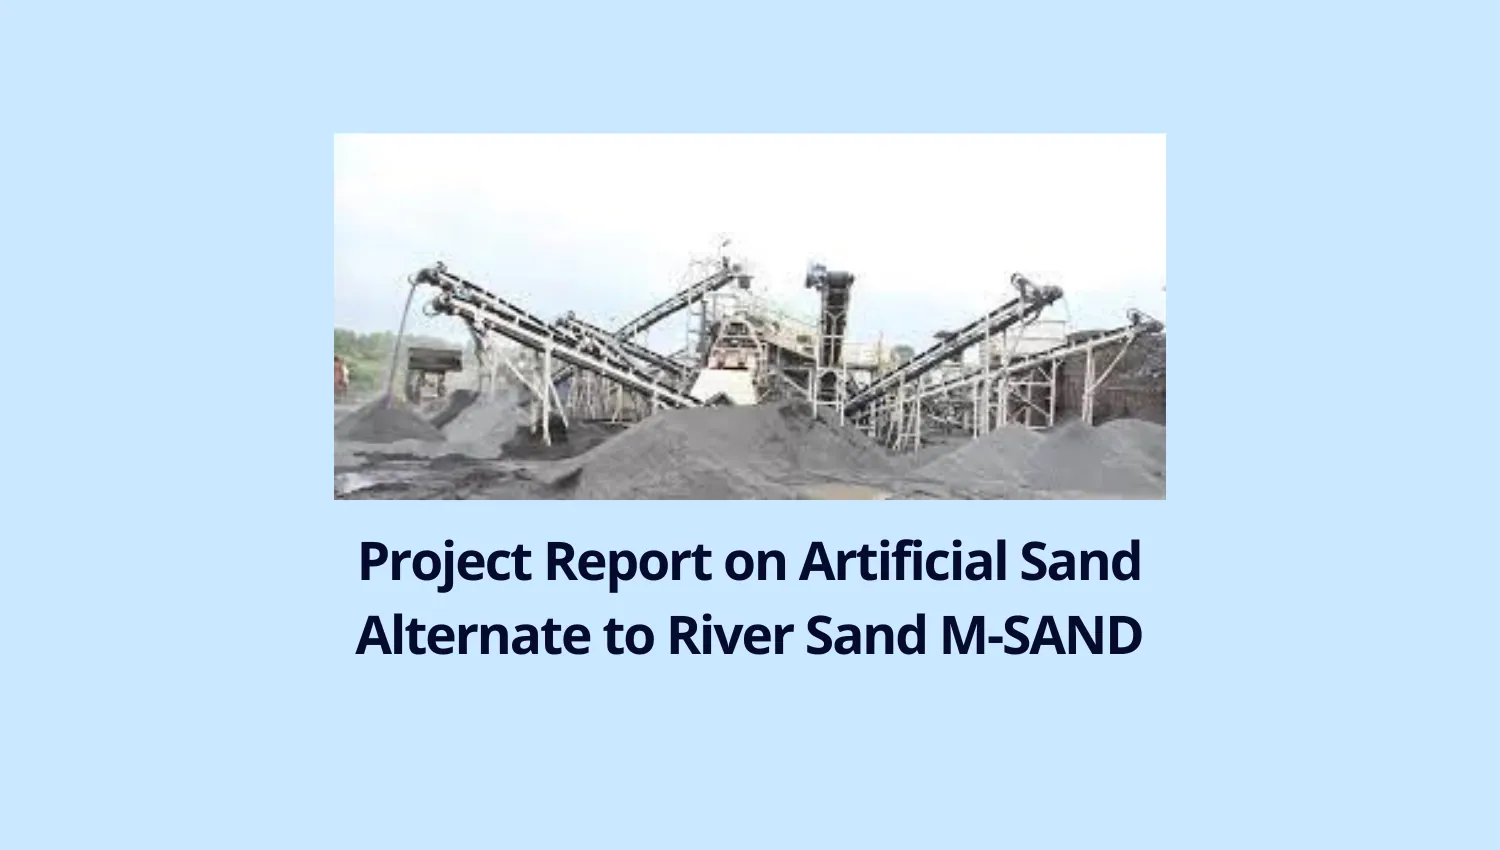 Project Report on Artificial Sand - A Viable Alternative, An Alternate to River Sand